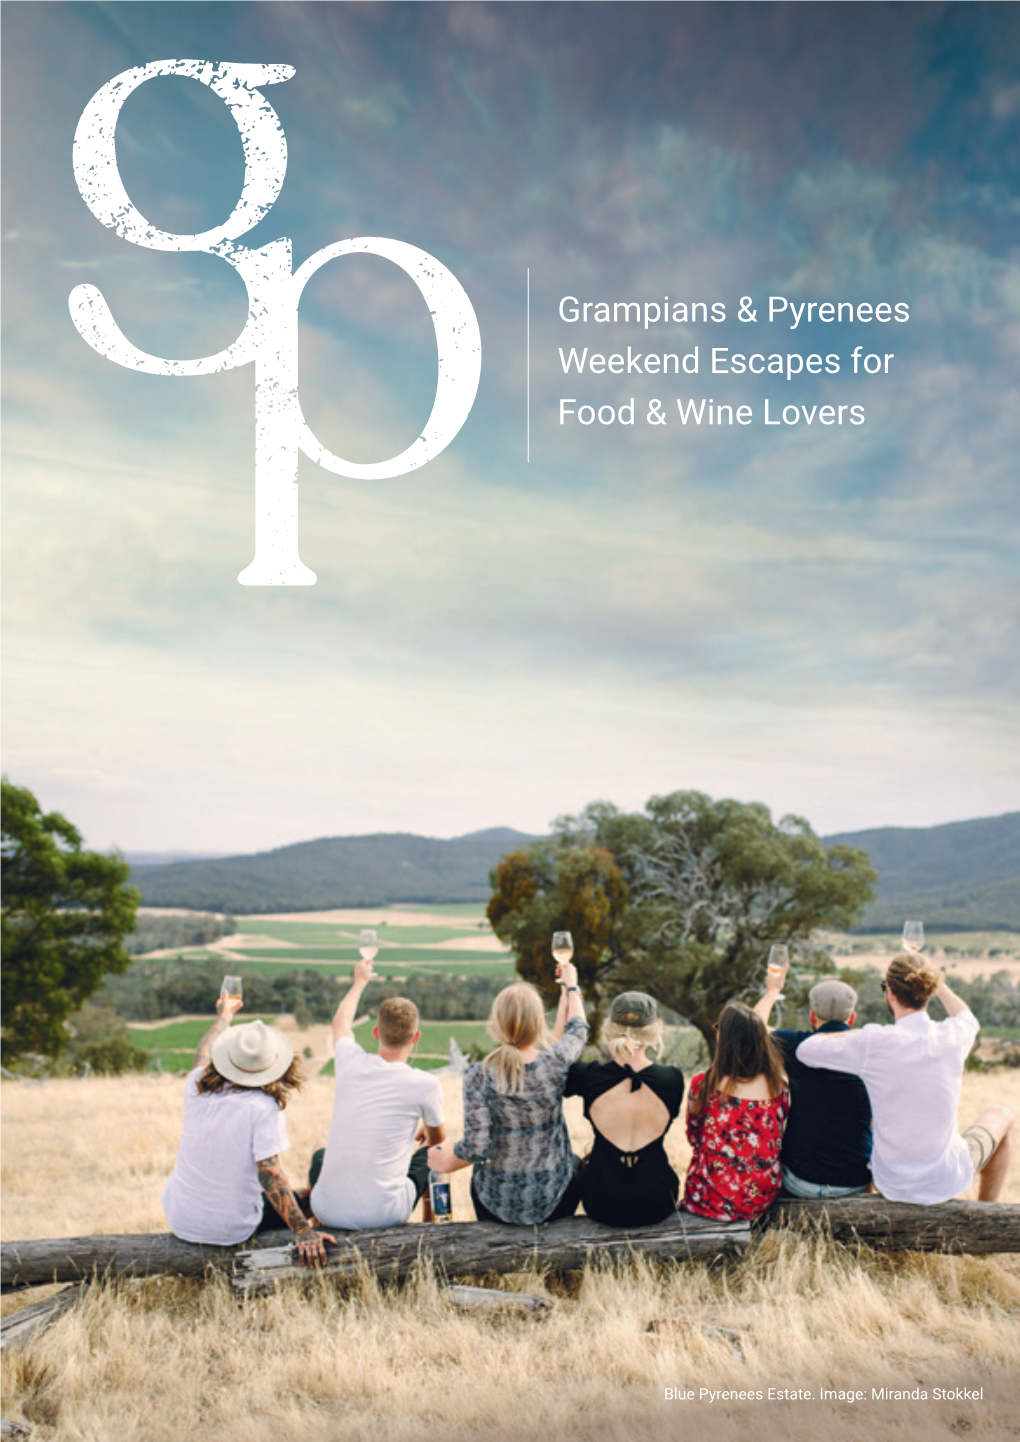 Grampians & Pyrenees Weekend Escapes for Food & Wine Lovers